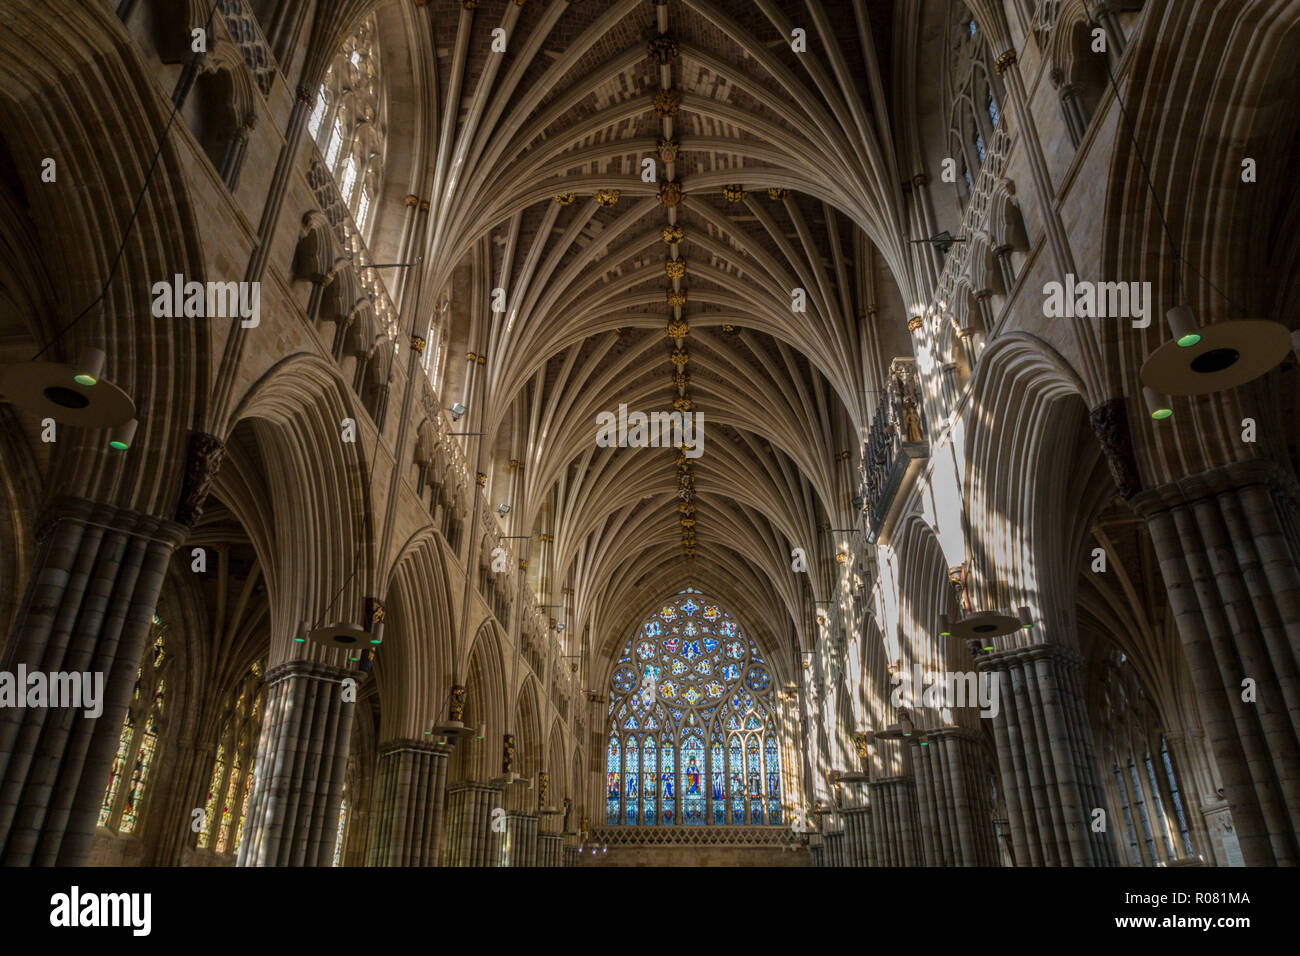 The vaulted ceiling and Great West Window in the Nave of Exeter cathedral. The longest uniterrupted gothic stone vaulted ceiling of any cathedral in t Stock Photo